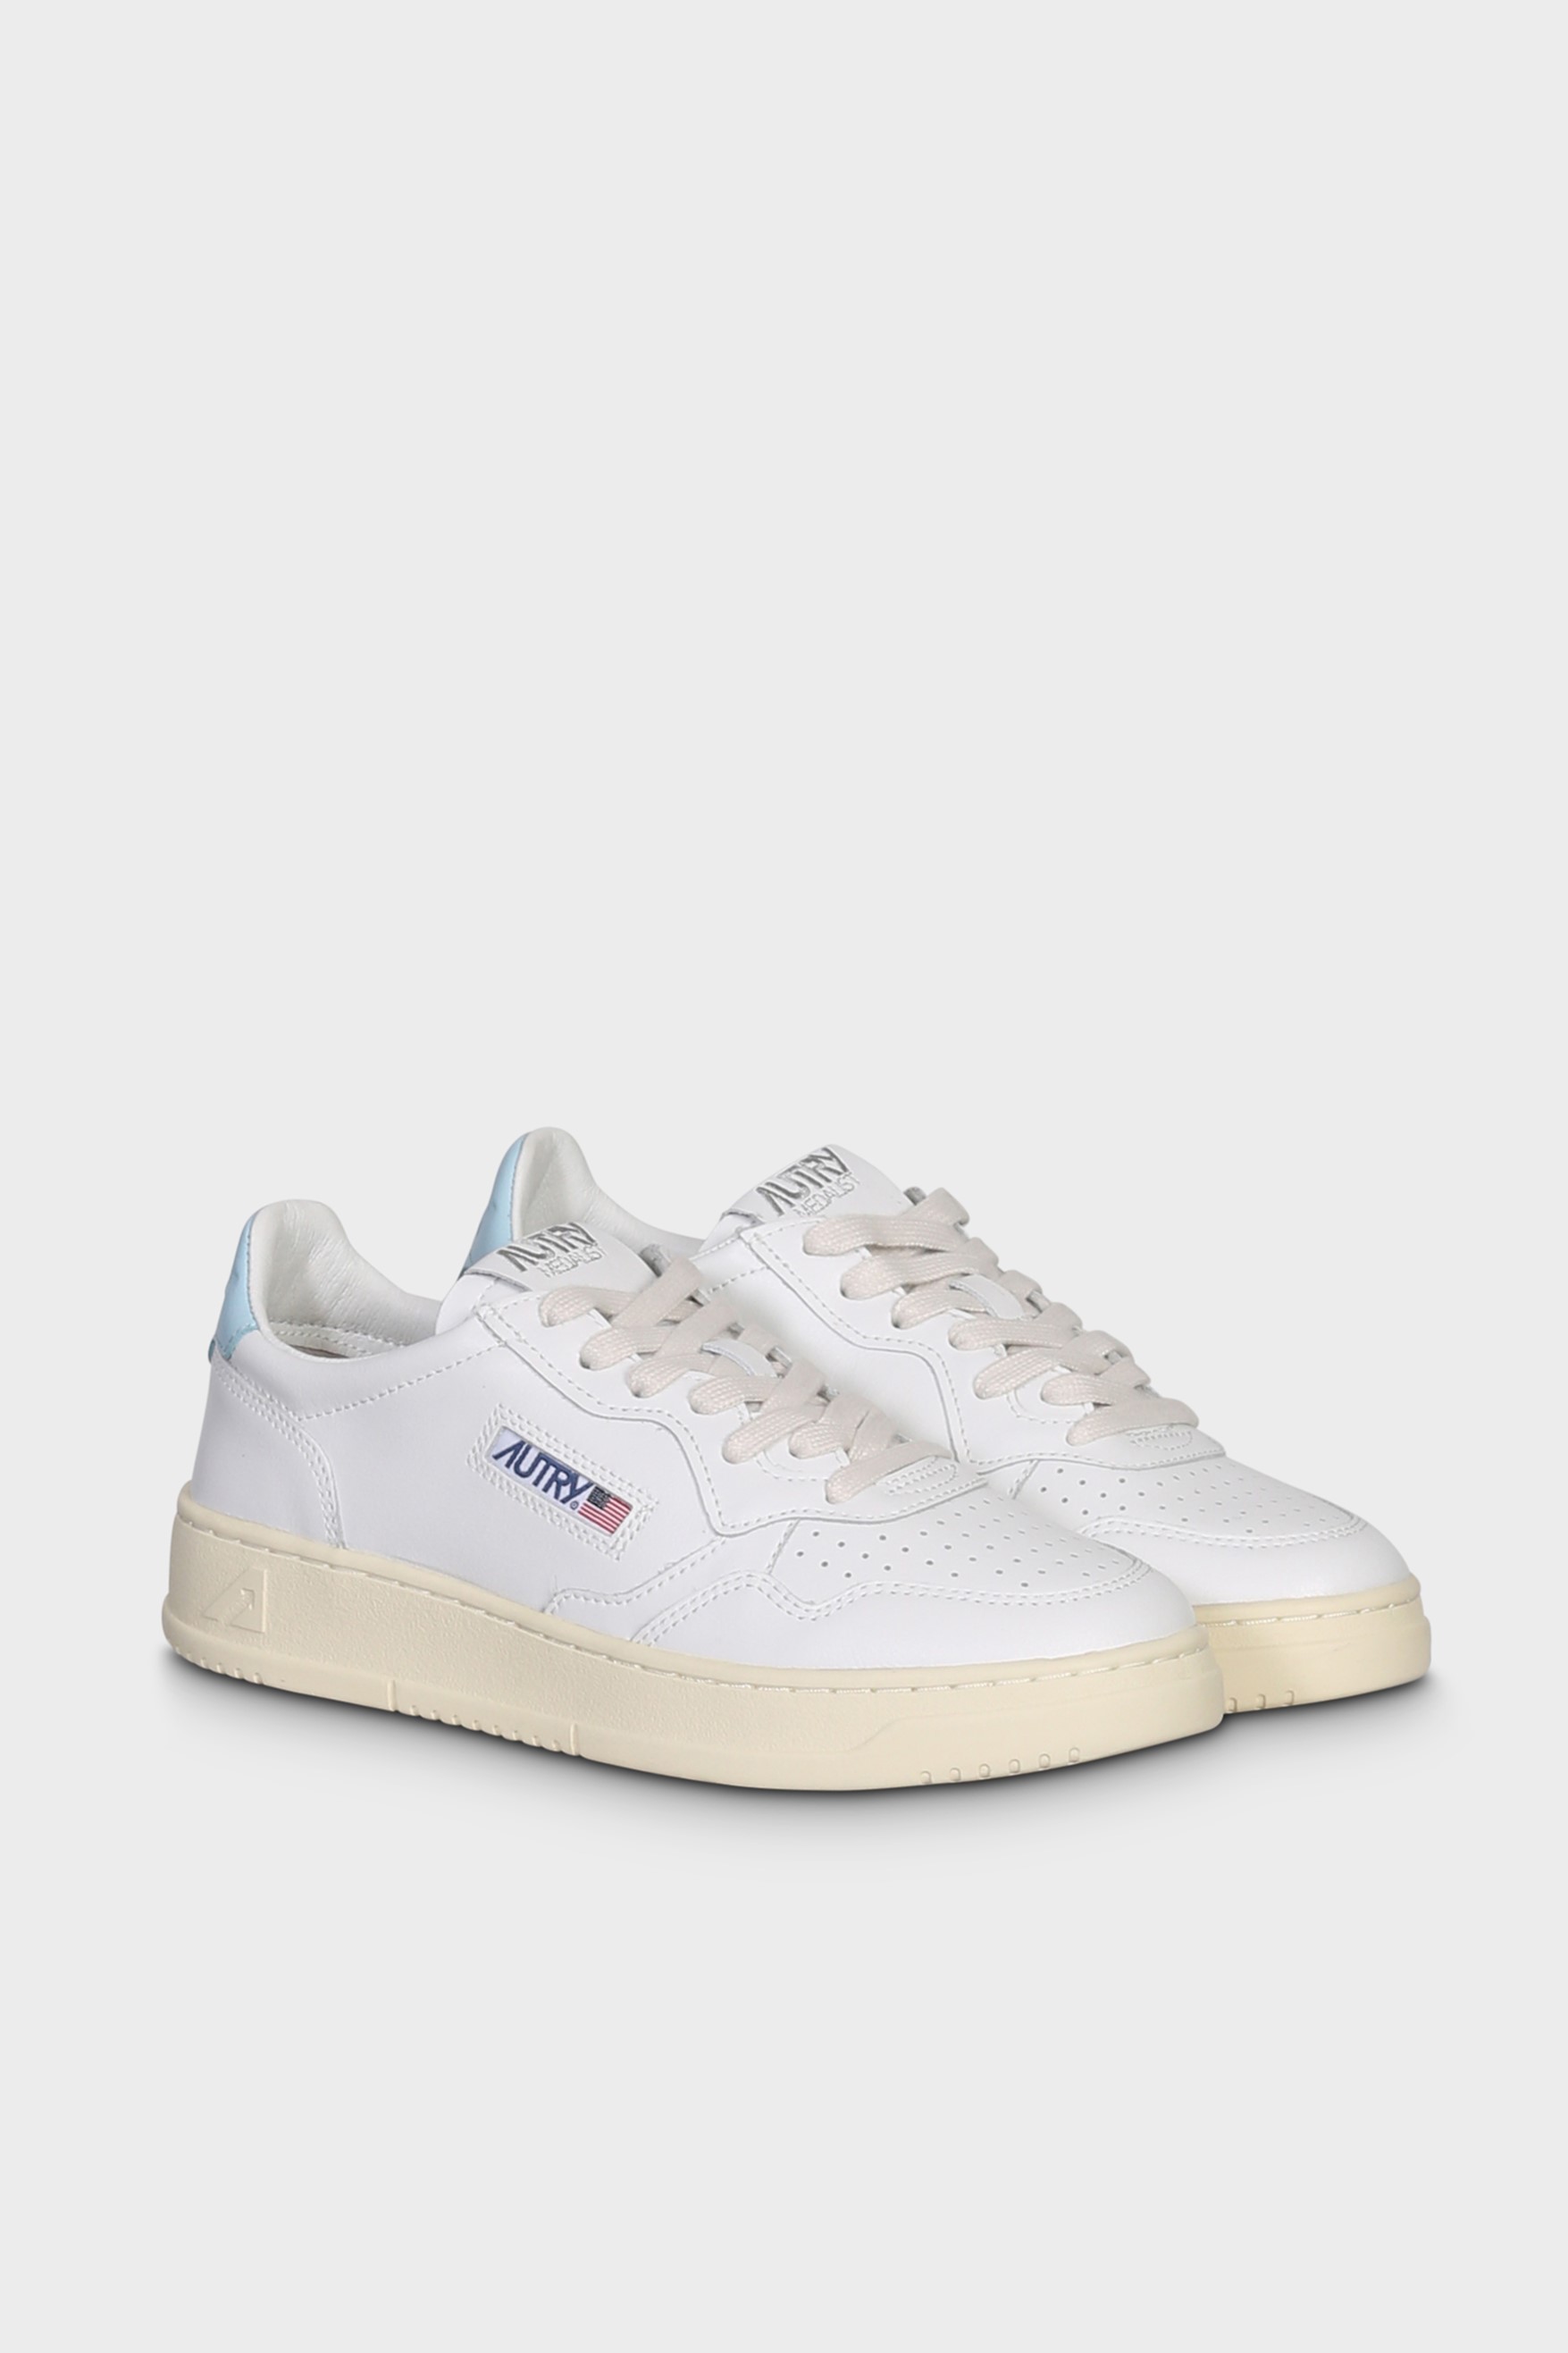 AUTRY ACTION SHOES Medalist Low Sneaker White/Stream Blue 46